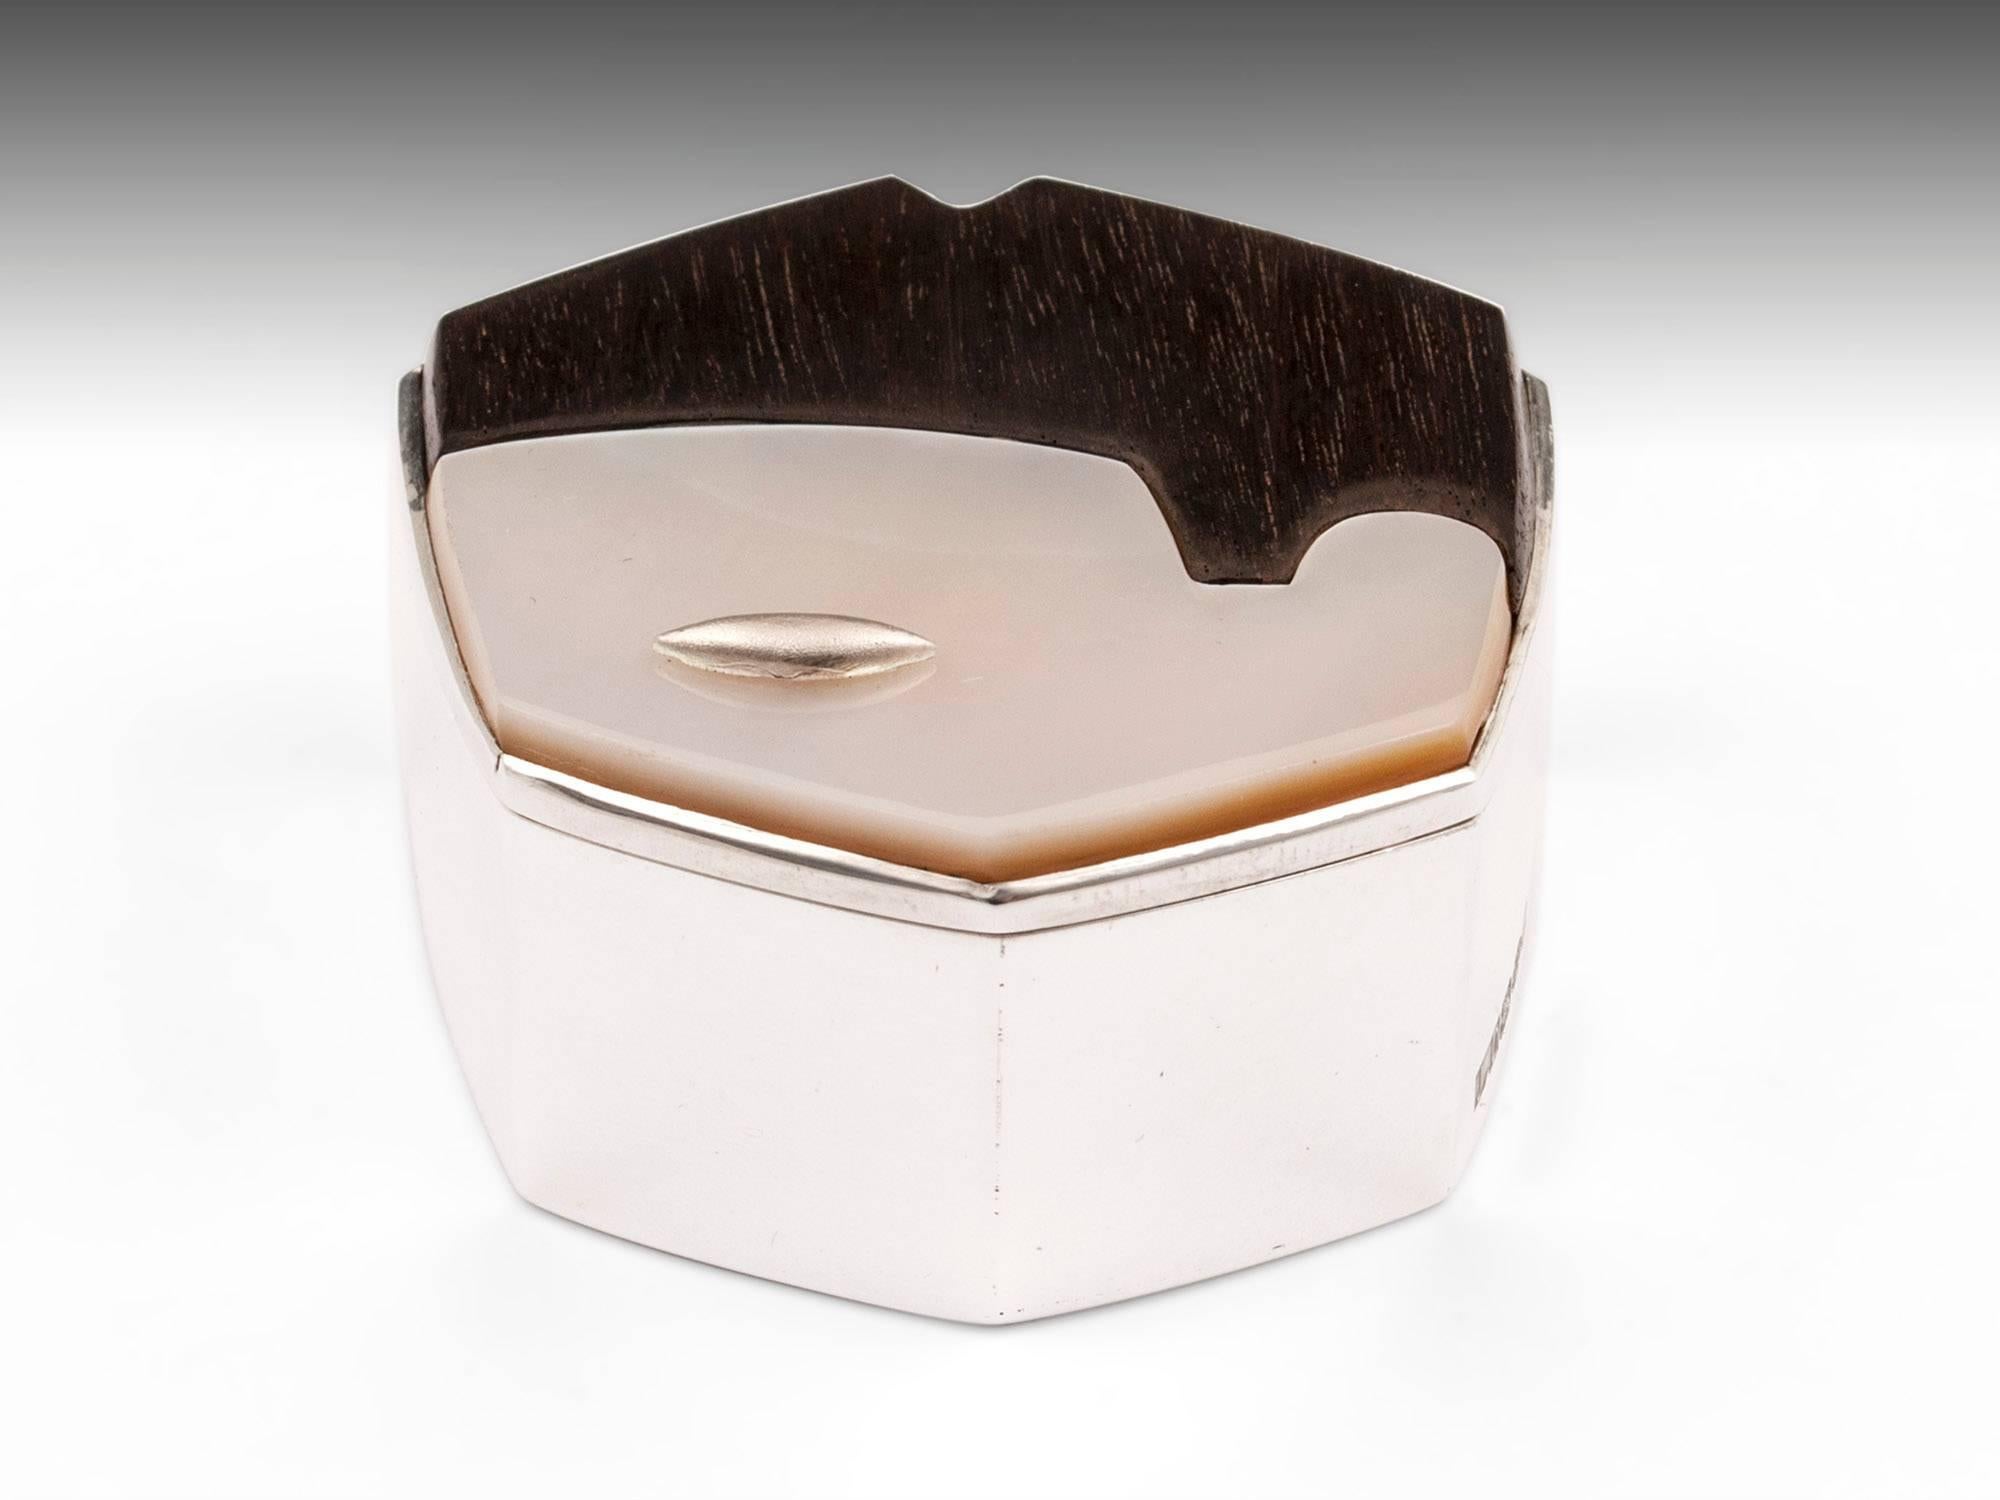 James Dougall shibayama face boxes.
The new face boxes by James Dougall, the latest pieces by this award winning contemporary designer silversmith are the fusing of Shibayama, an ancient Japanese carving and inlay technique with modern European